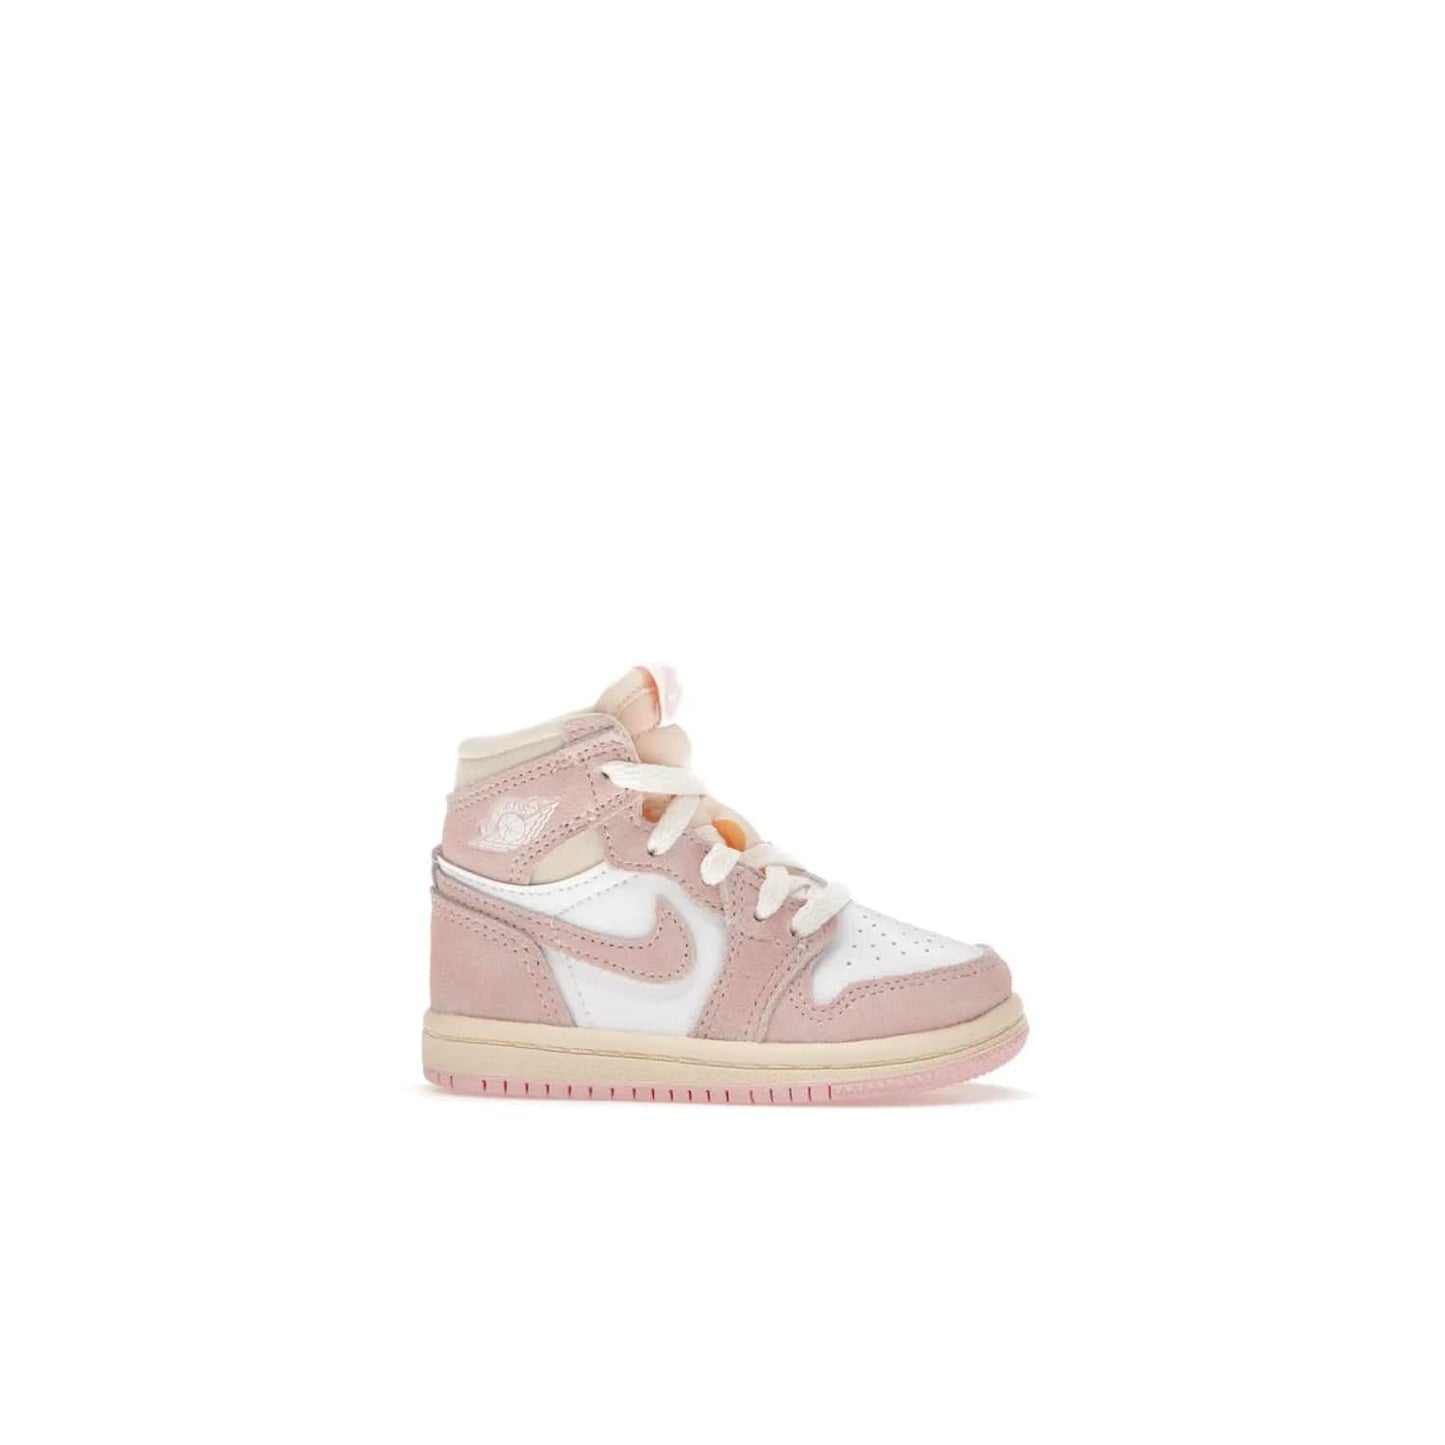 Jordan 1 Retro High OG Washed Pink (TD) - Image 2 - Only at www.BallersClubKickz.com - Retro style meets modern comfort: Introducing the Jordan 1 High OG Washed Pink (TD). Combining Atmosphere/White/Muslin/Sail colors with a high-rise silhouette, these shoes will be an instant classic when they release April 22, 2023.